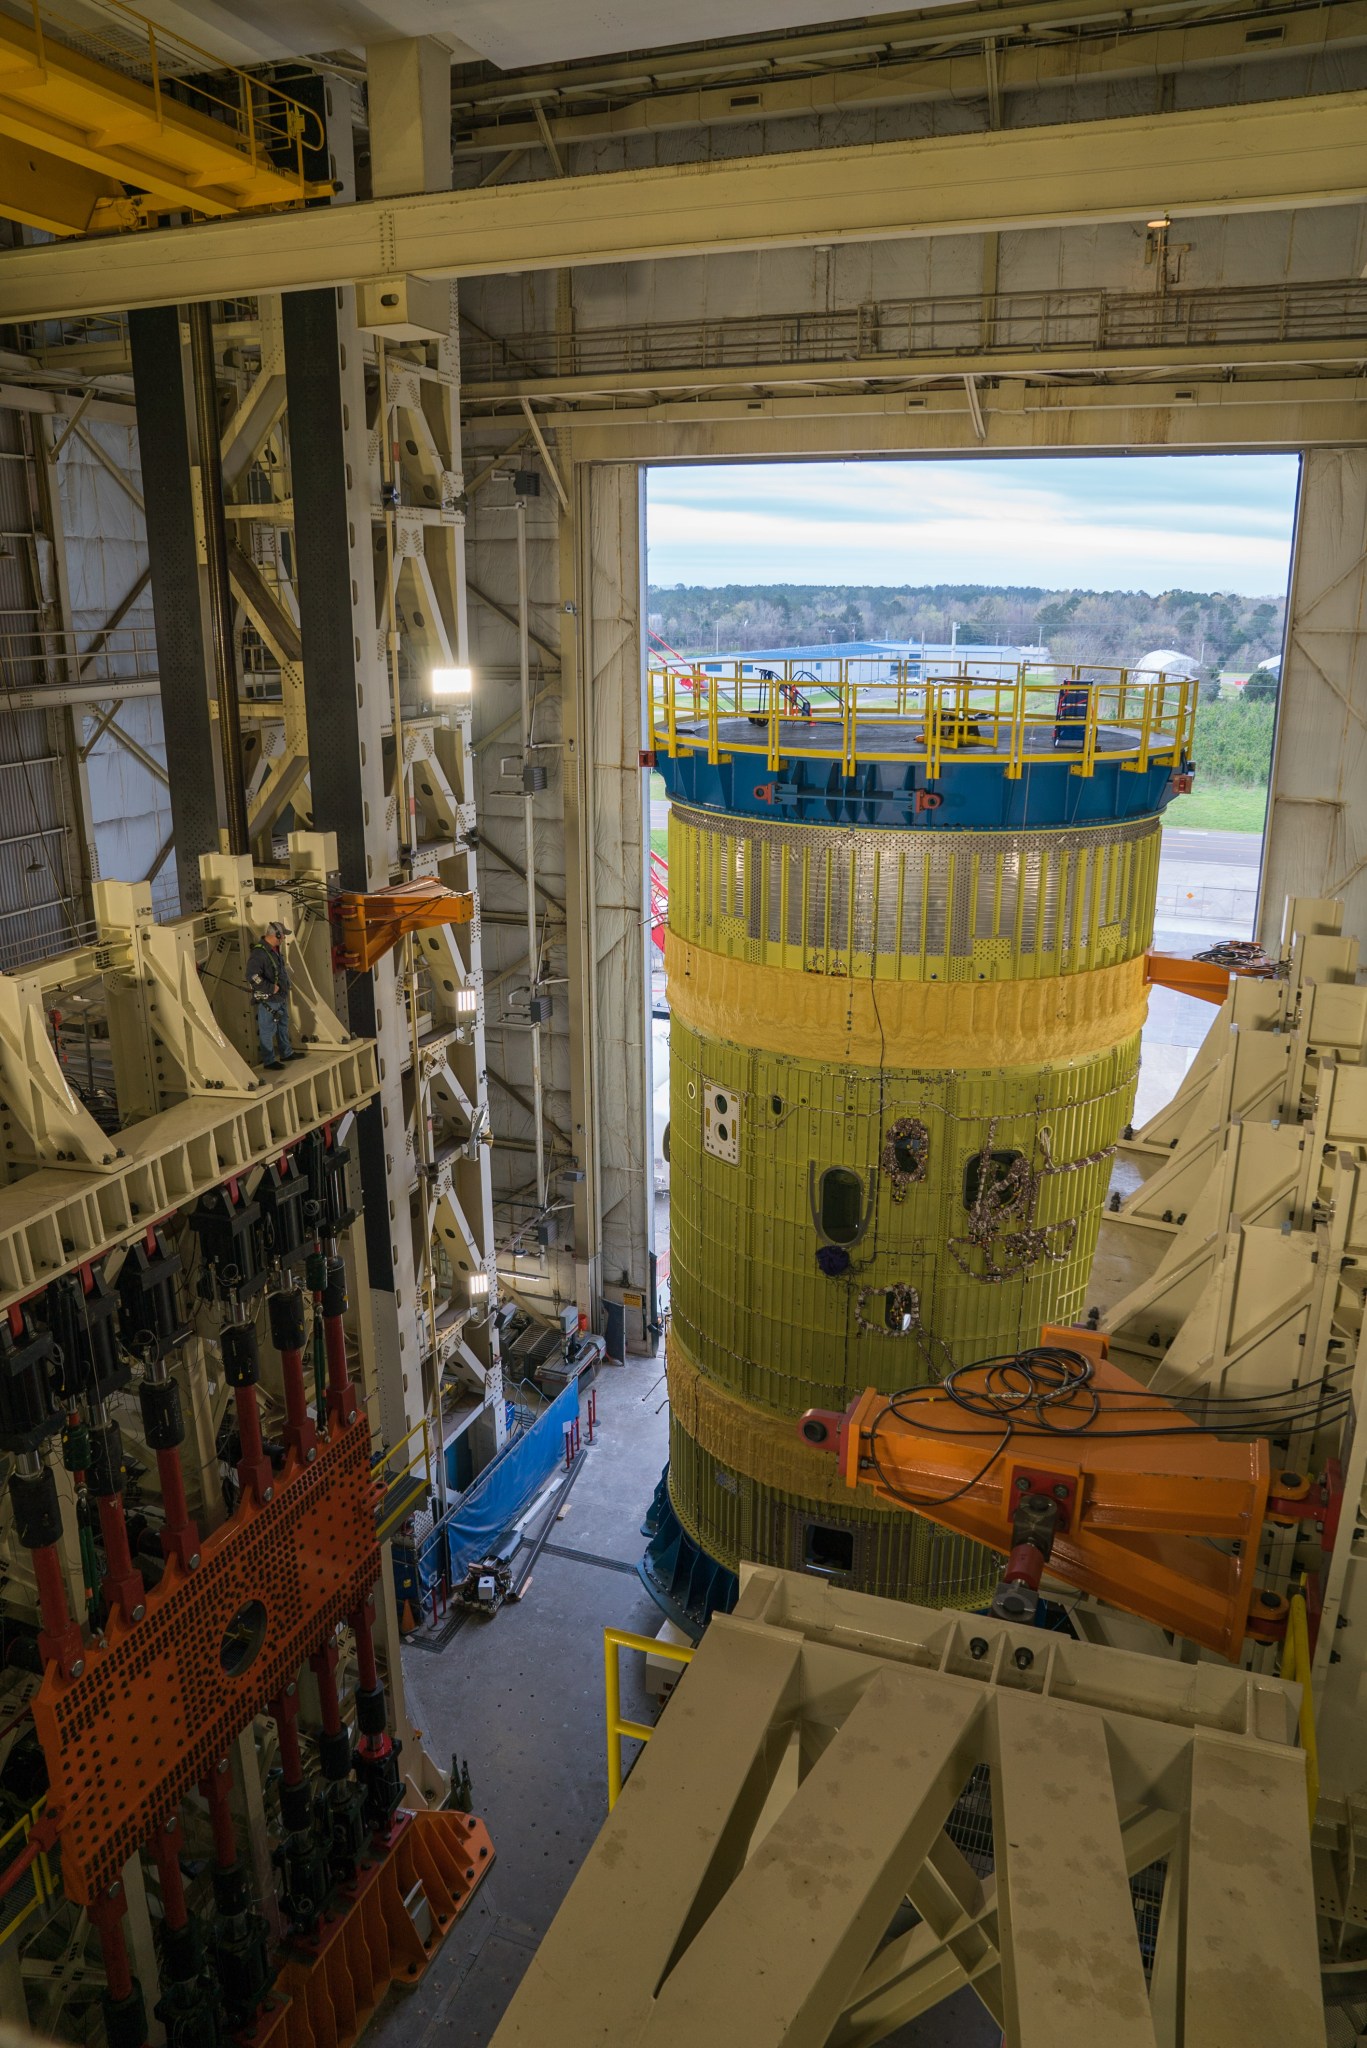 A structural test version of the intertank for NASA’s deep-space rocket, the Space Launch System